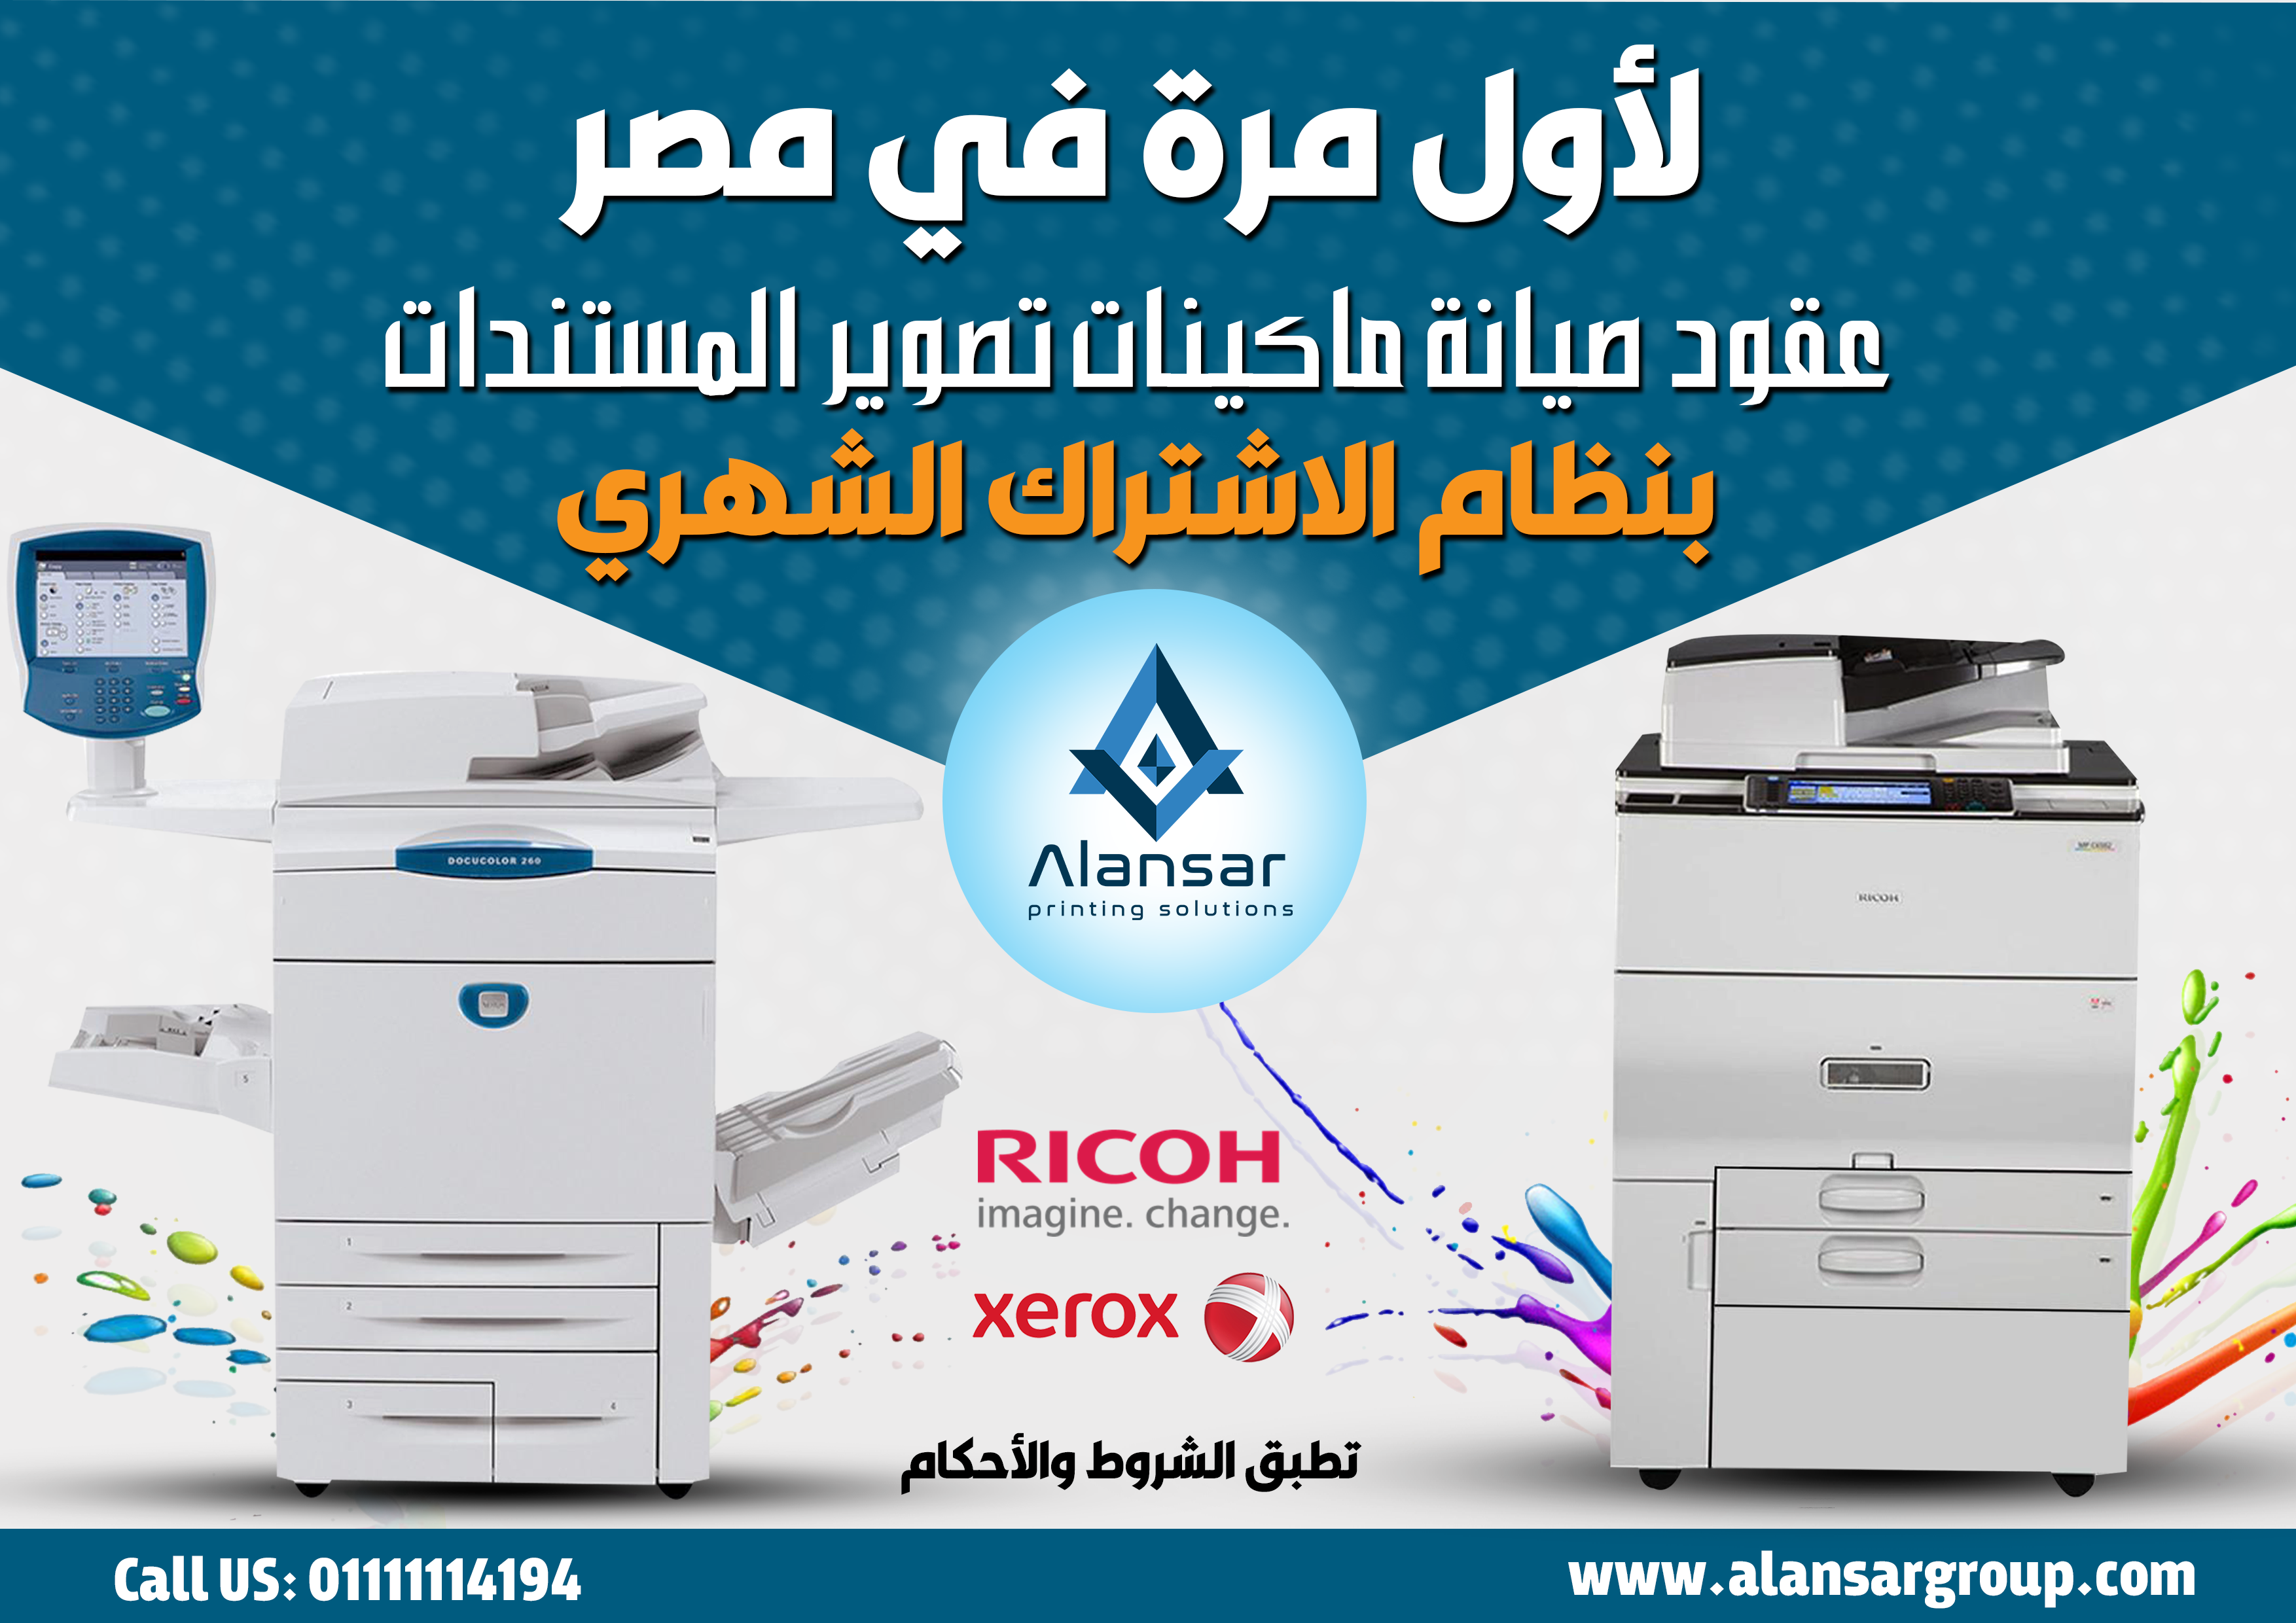 For the first time in Egypt, maintenance contracts for photocopying machines with the monthly subscription system